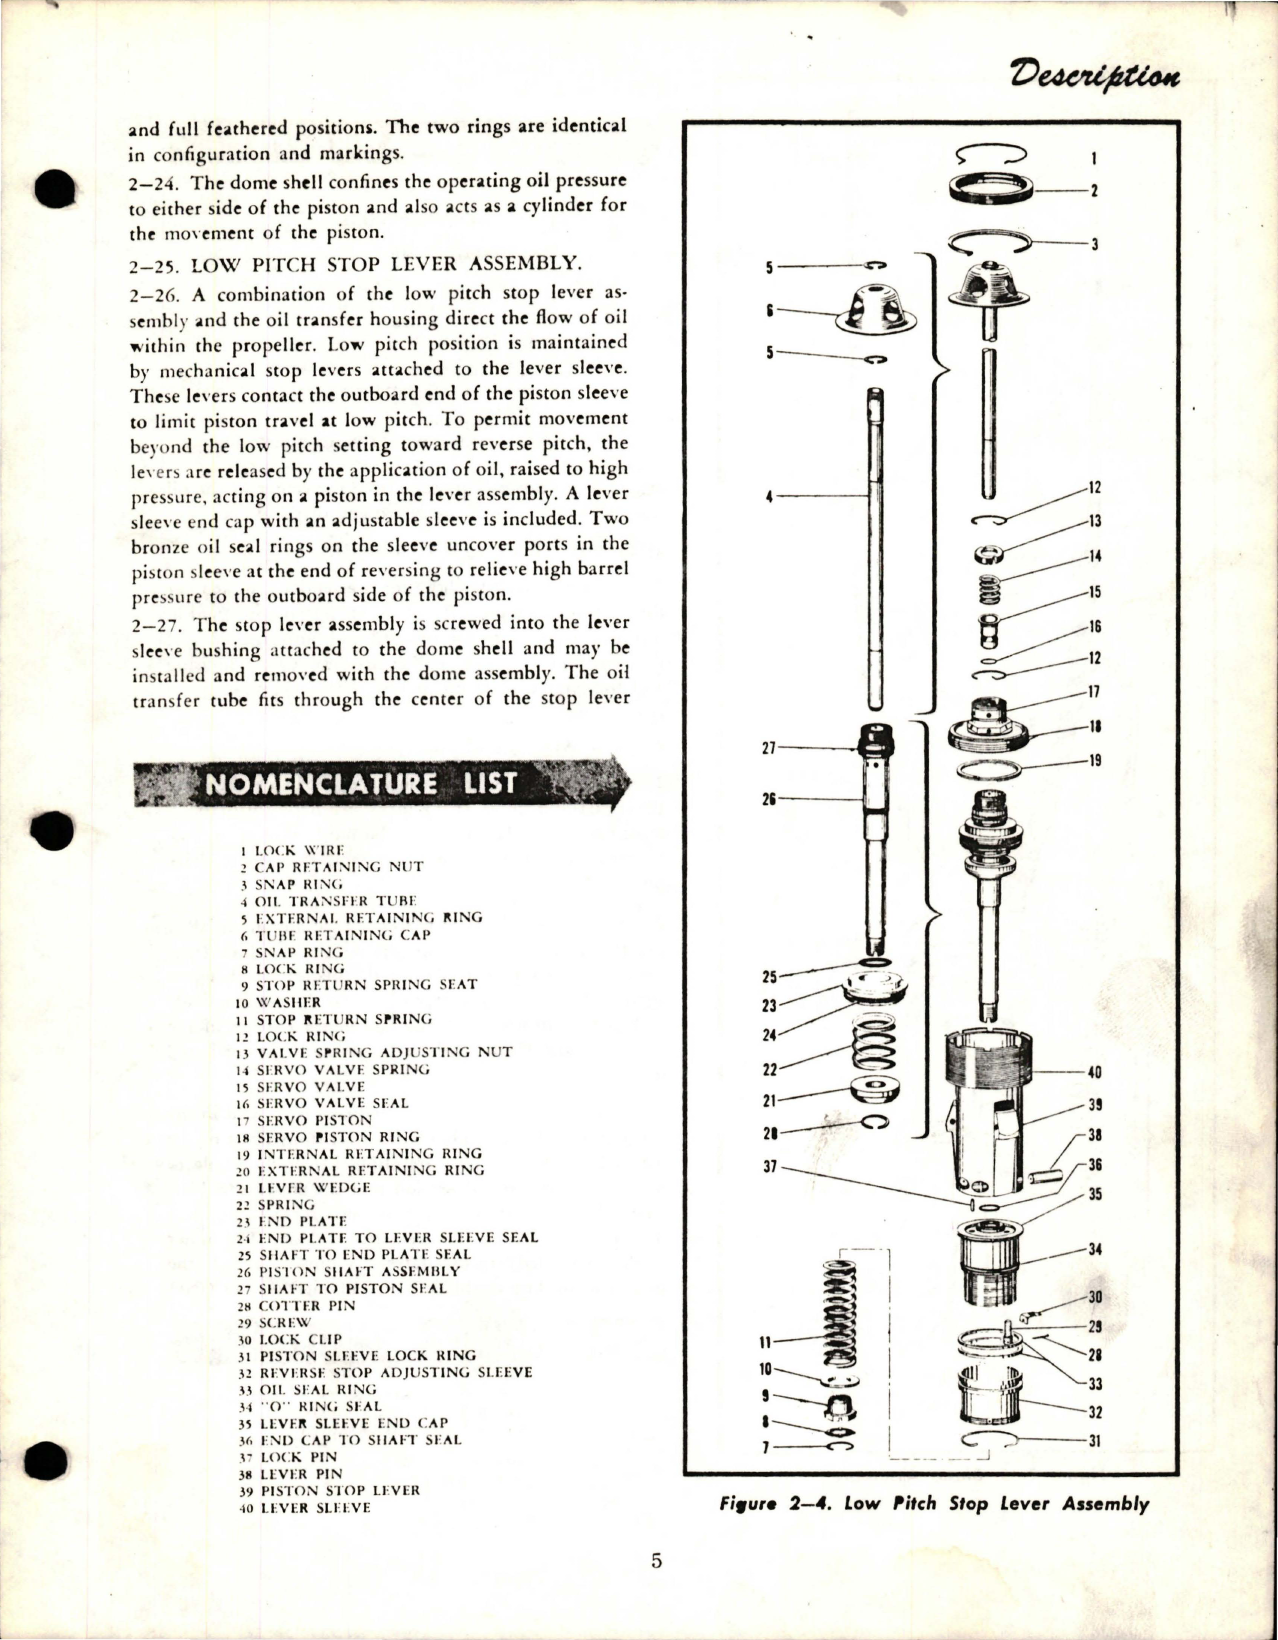 Sample page 7 from AirCorps Library document: Operation and Service Instructions for Reversing Hydromatic Propeller - Model 43E60 